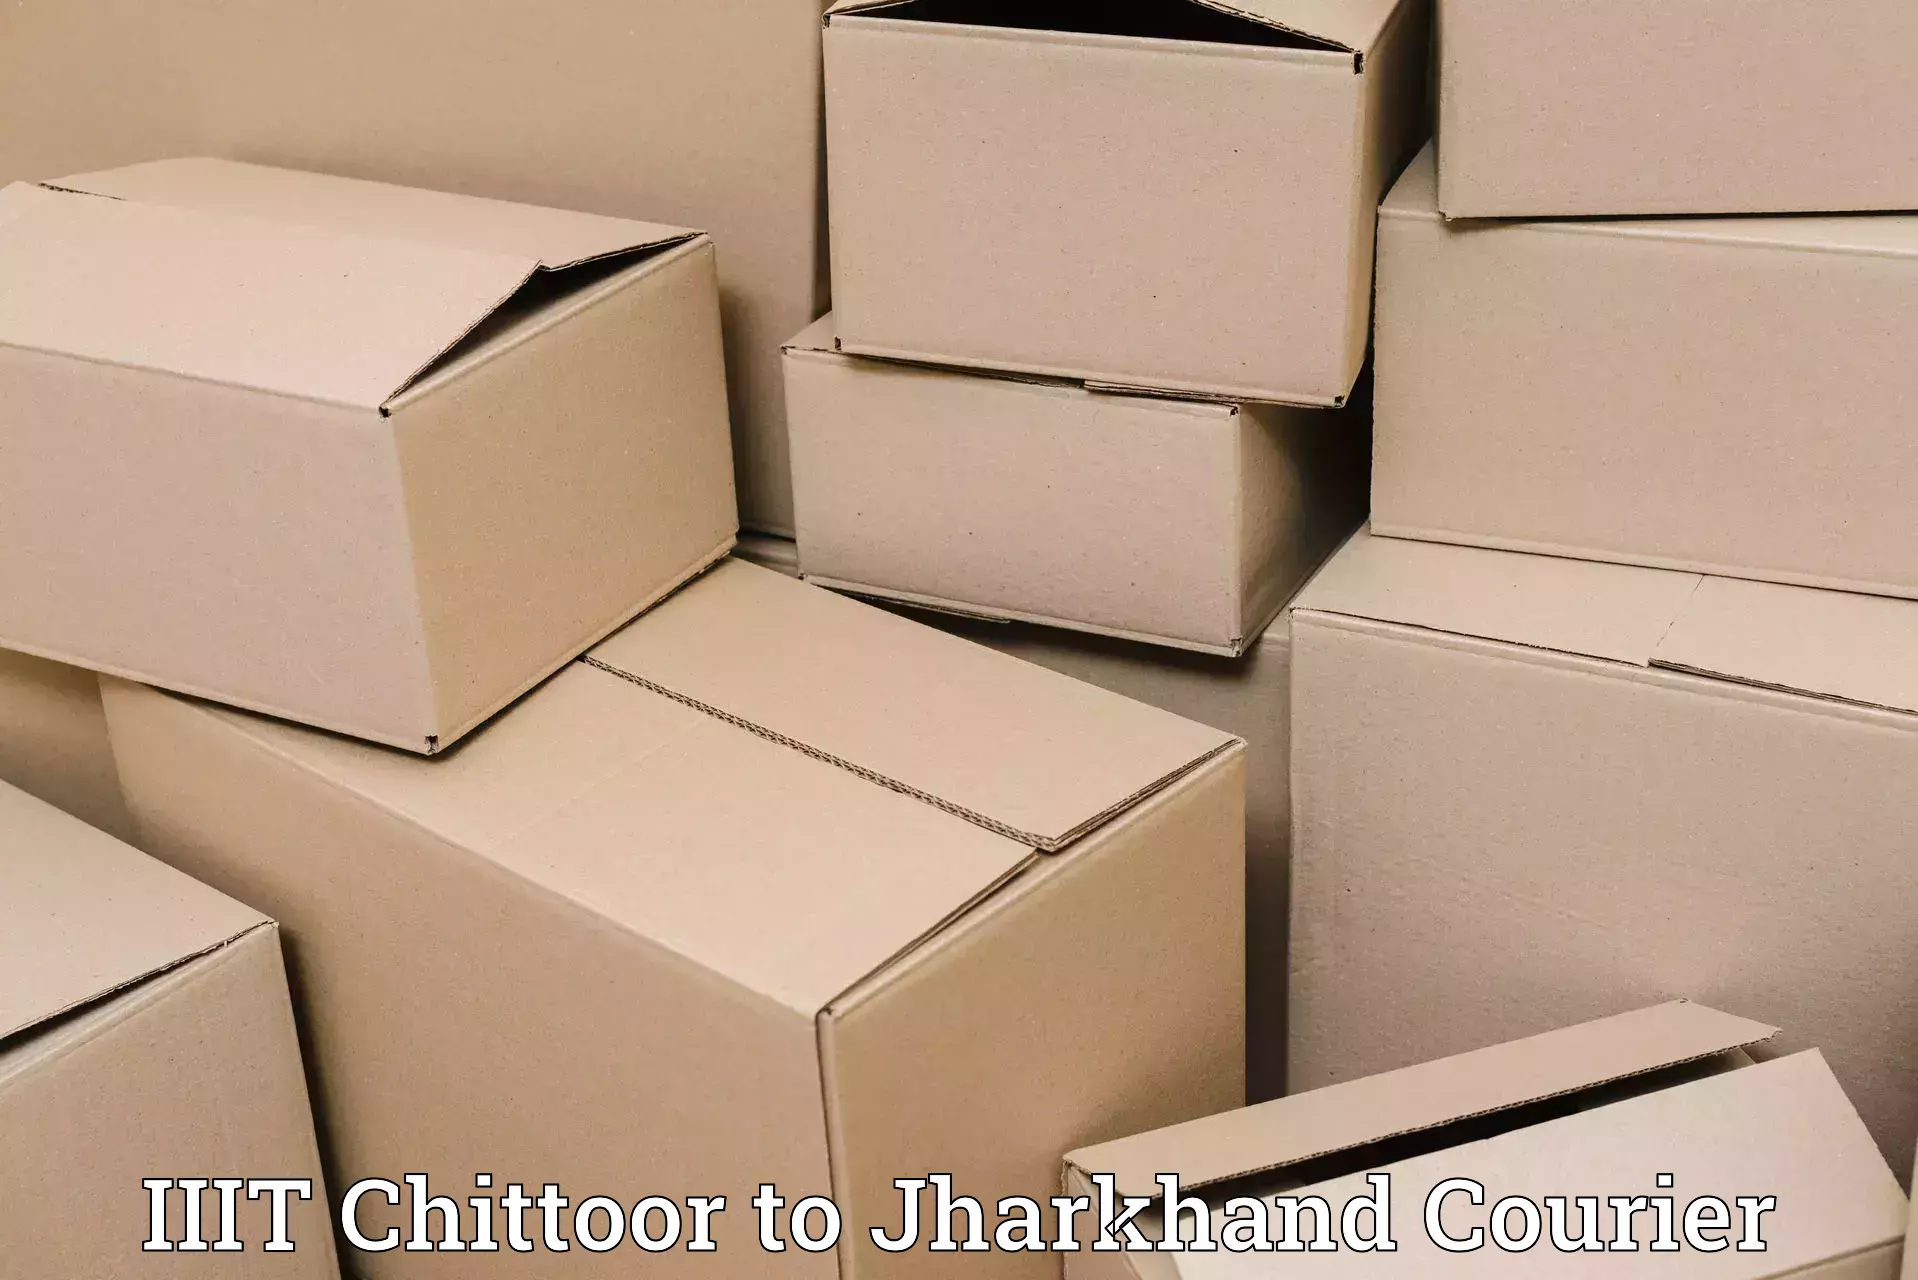 State-of-the-art courier technology IIIT Chittoor to Birla Institute of Technology Ranchi